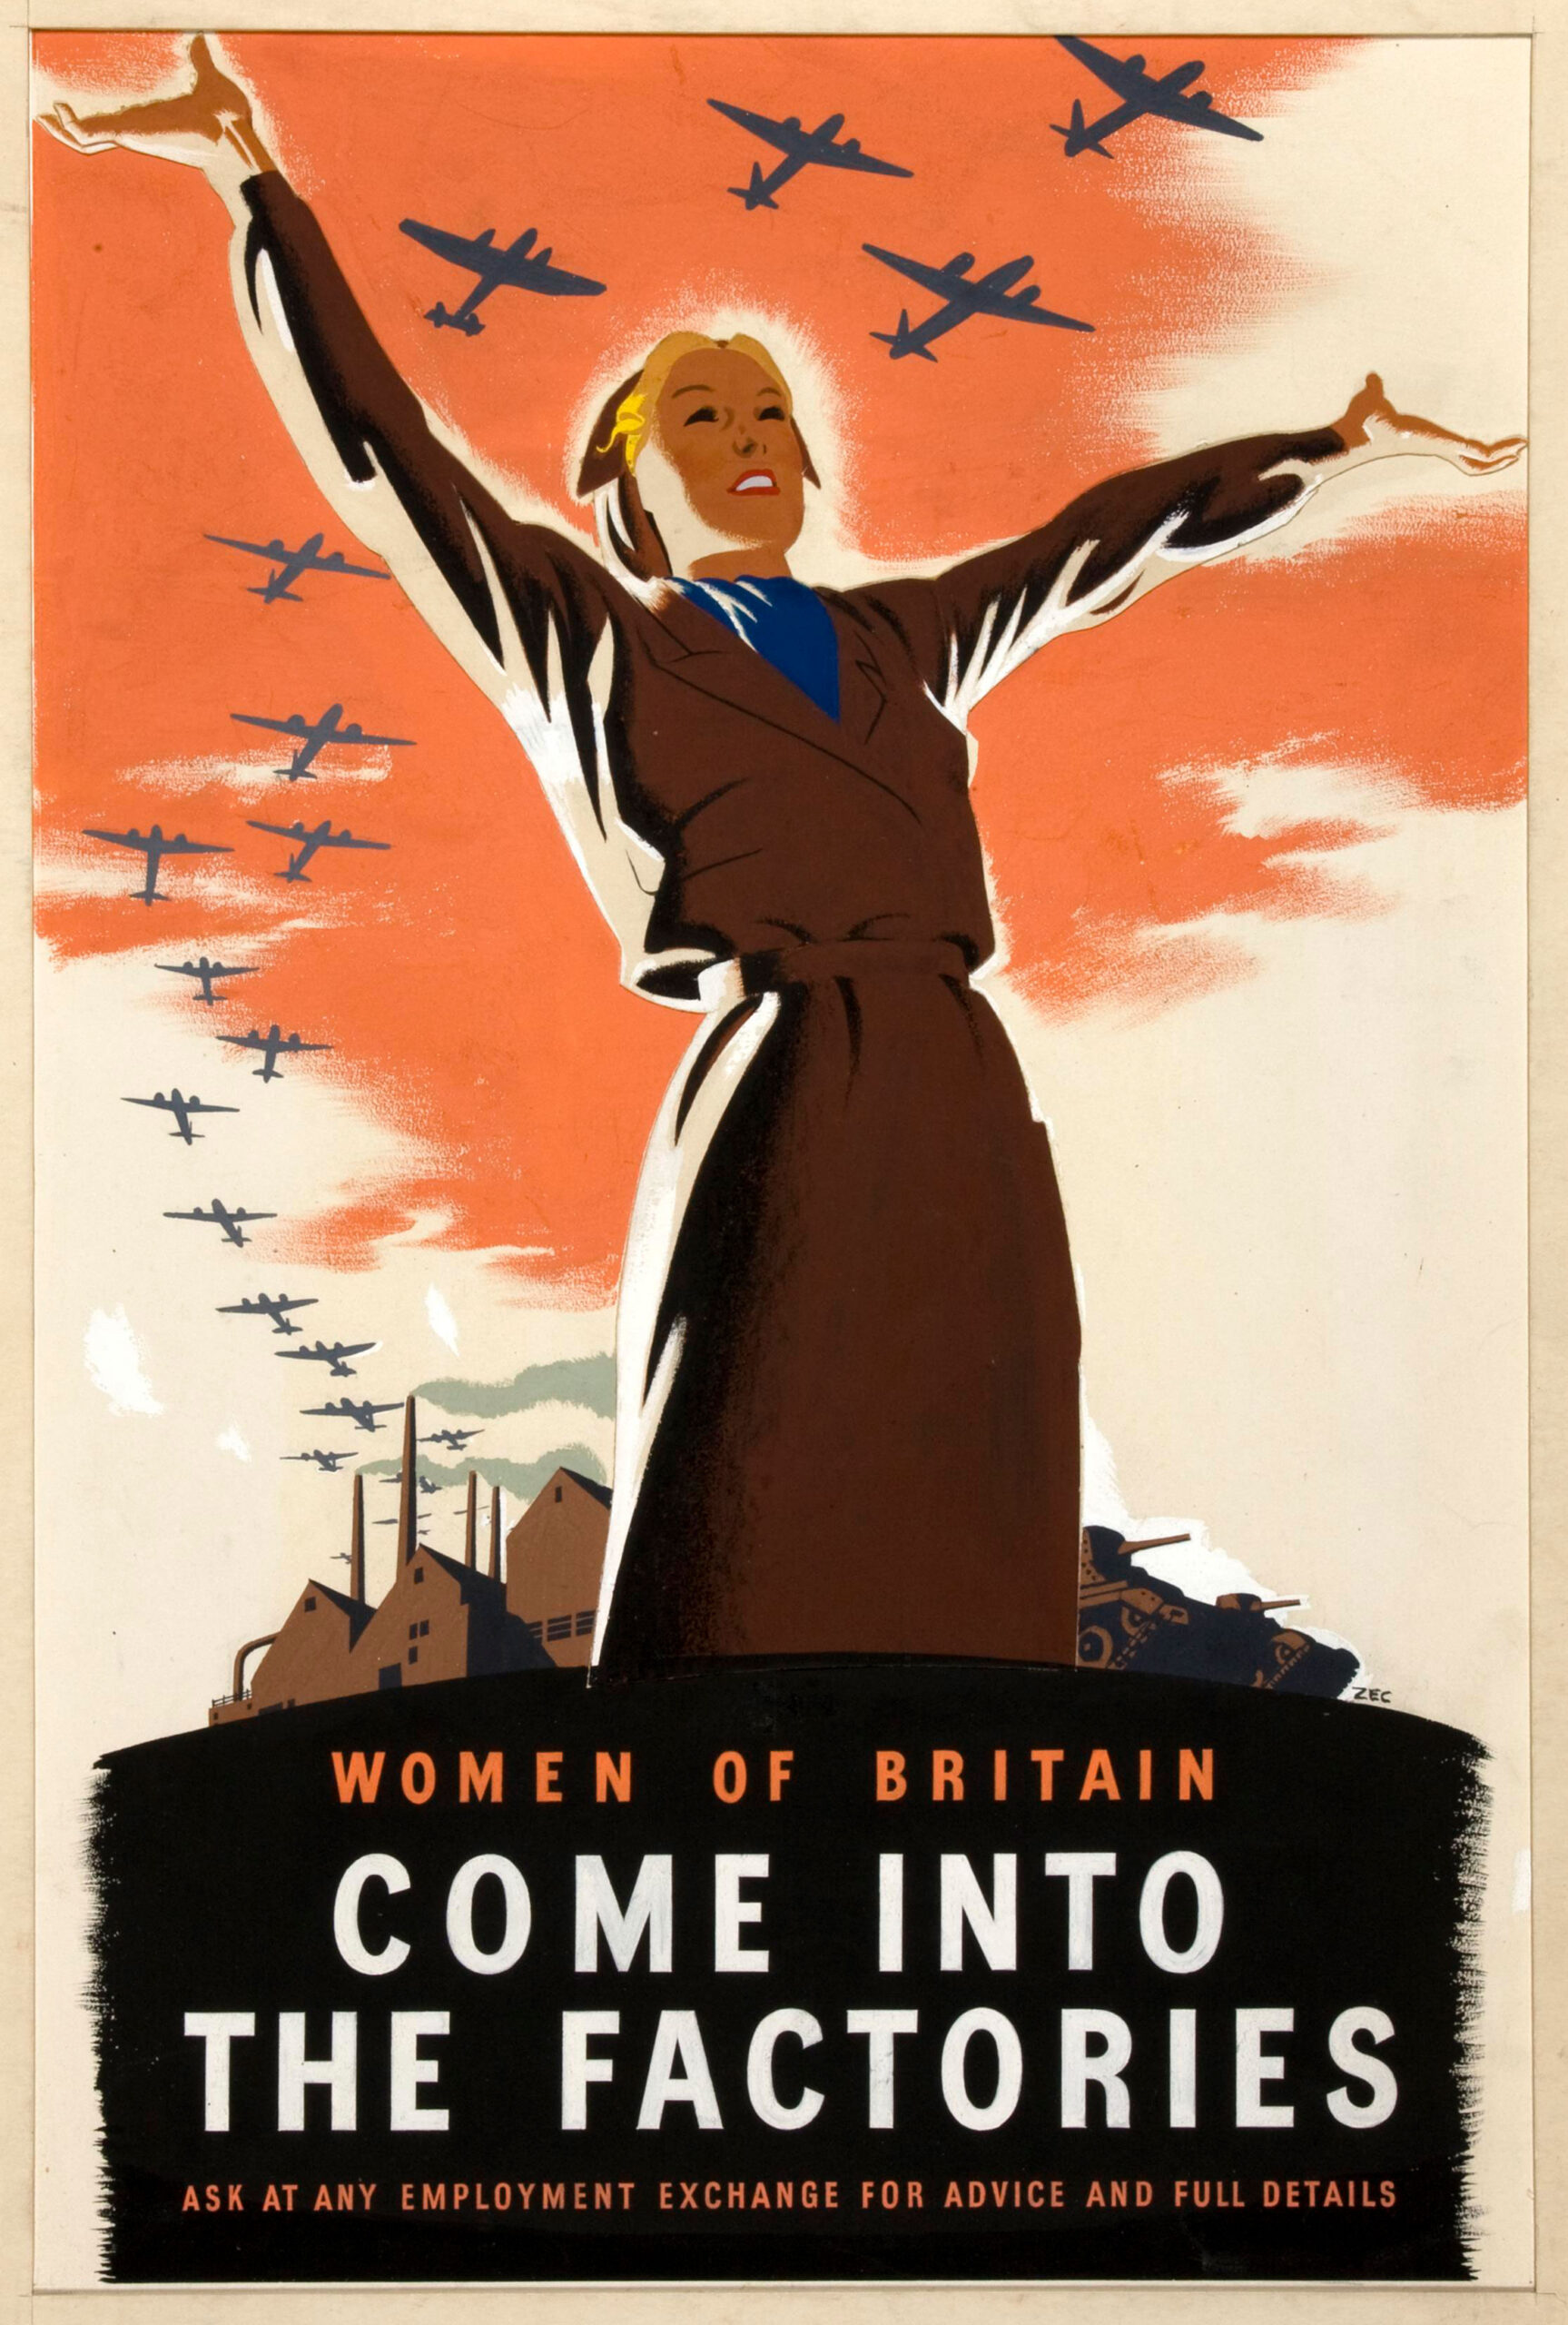 Poster featuring illustration of a woman spreading her arms as a row of airplanes fly through the orange sky over the factories and tanks behind her.